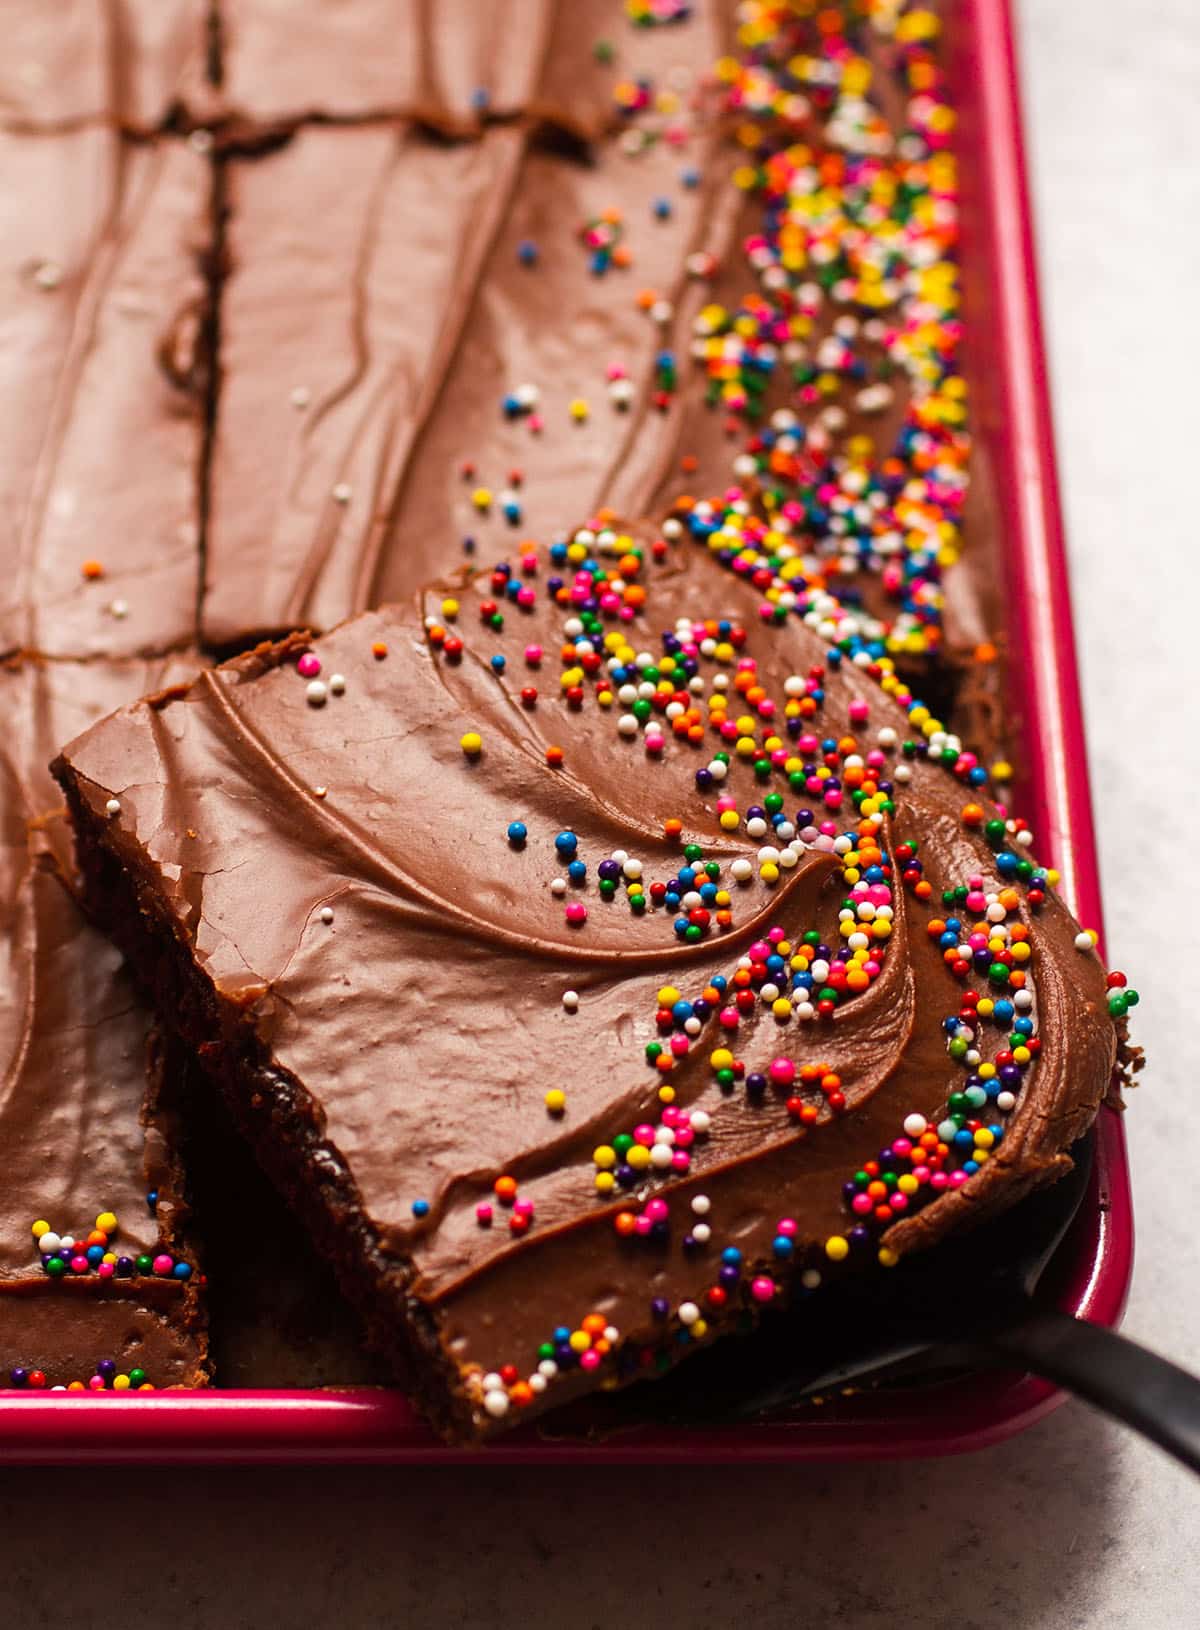 Slice of chocolate sheet cake with fudge frosting in a red baking dish.